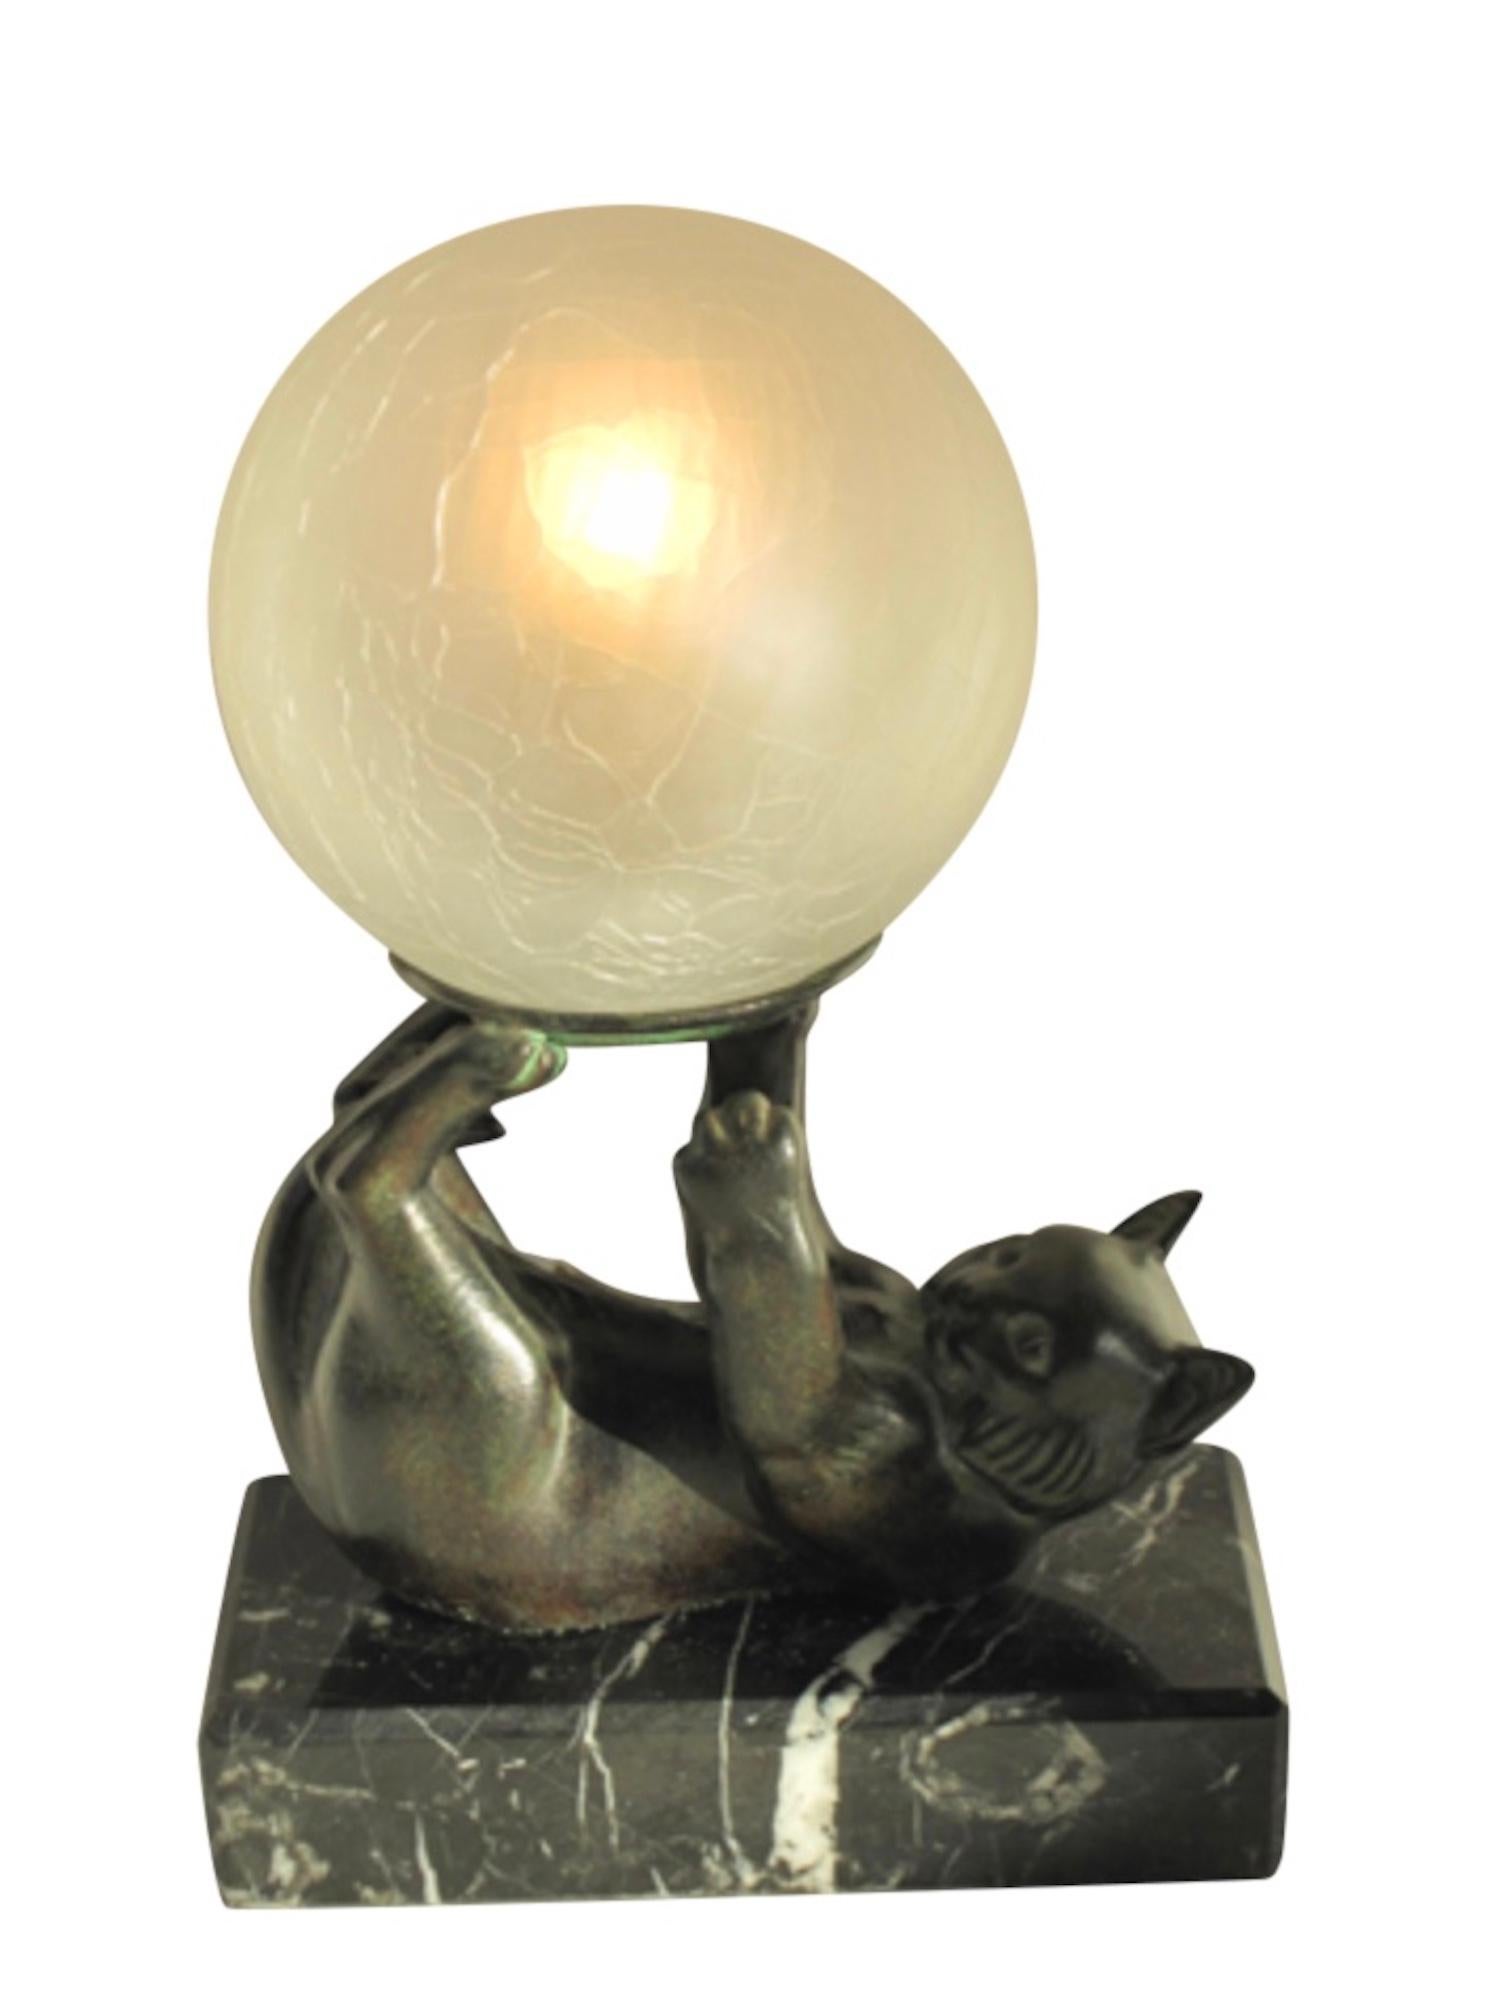 “Jongleur” (French: juggler)
Cat playing with a ball (On this case with a lighted glass ball)
Designed in France during the roaring 1920s by “Janle”, signed
Original “Max Le Verrier”
Art Deco style, France.

Sculpture made in “Régule”